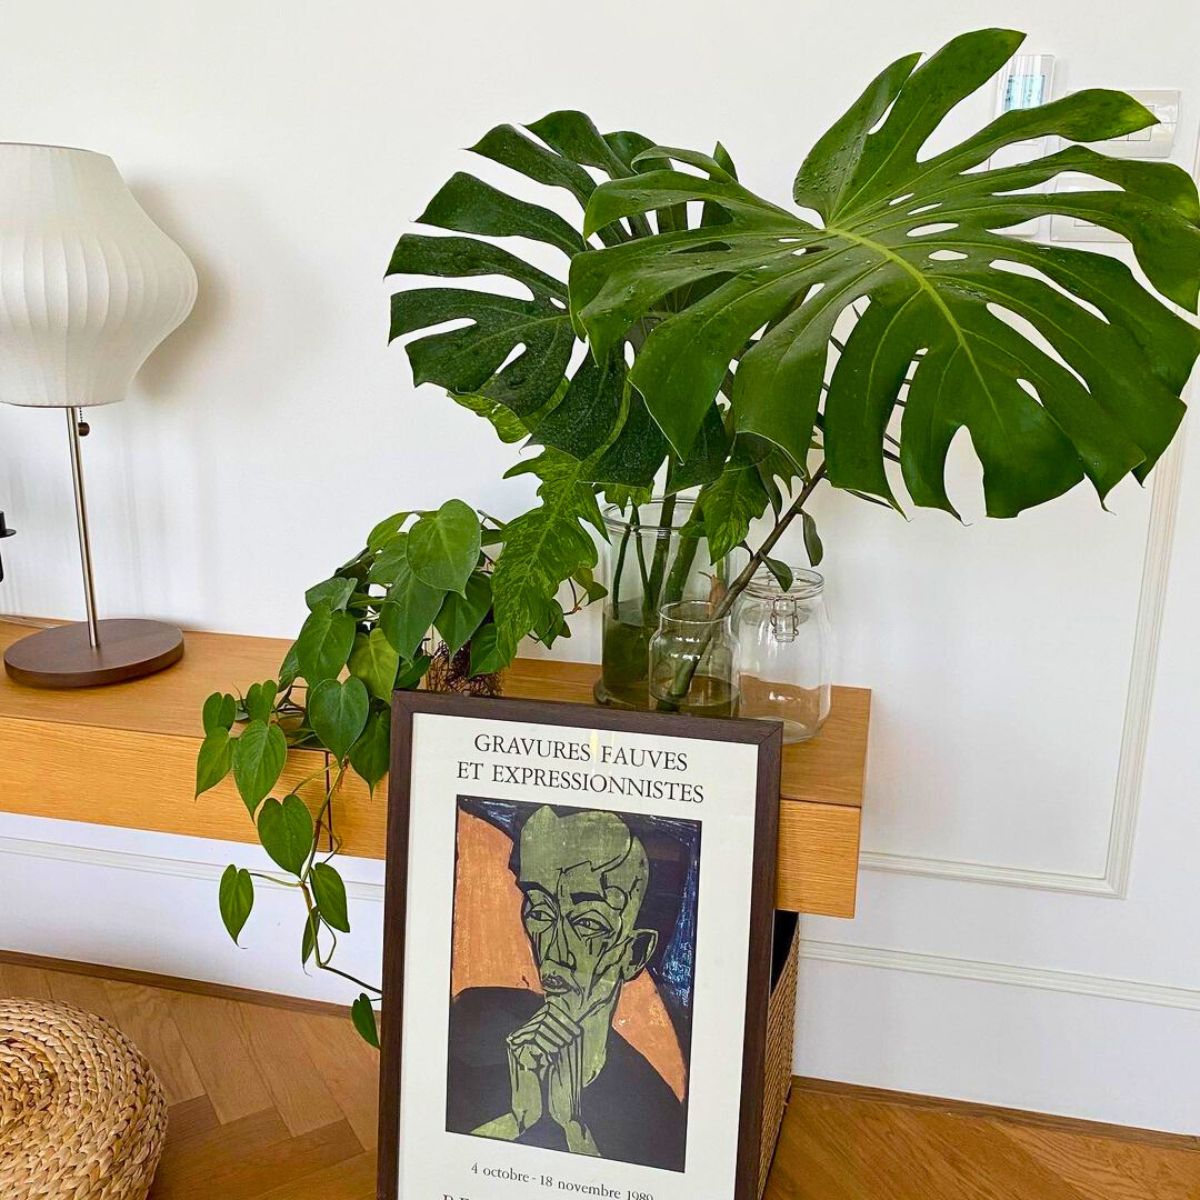 Swiss Cheese plant is the perfect houseplant to decorate spaces